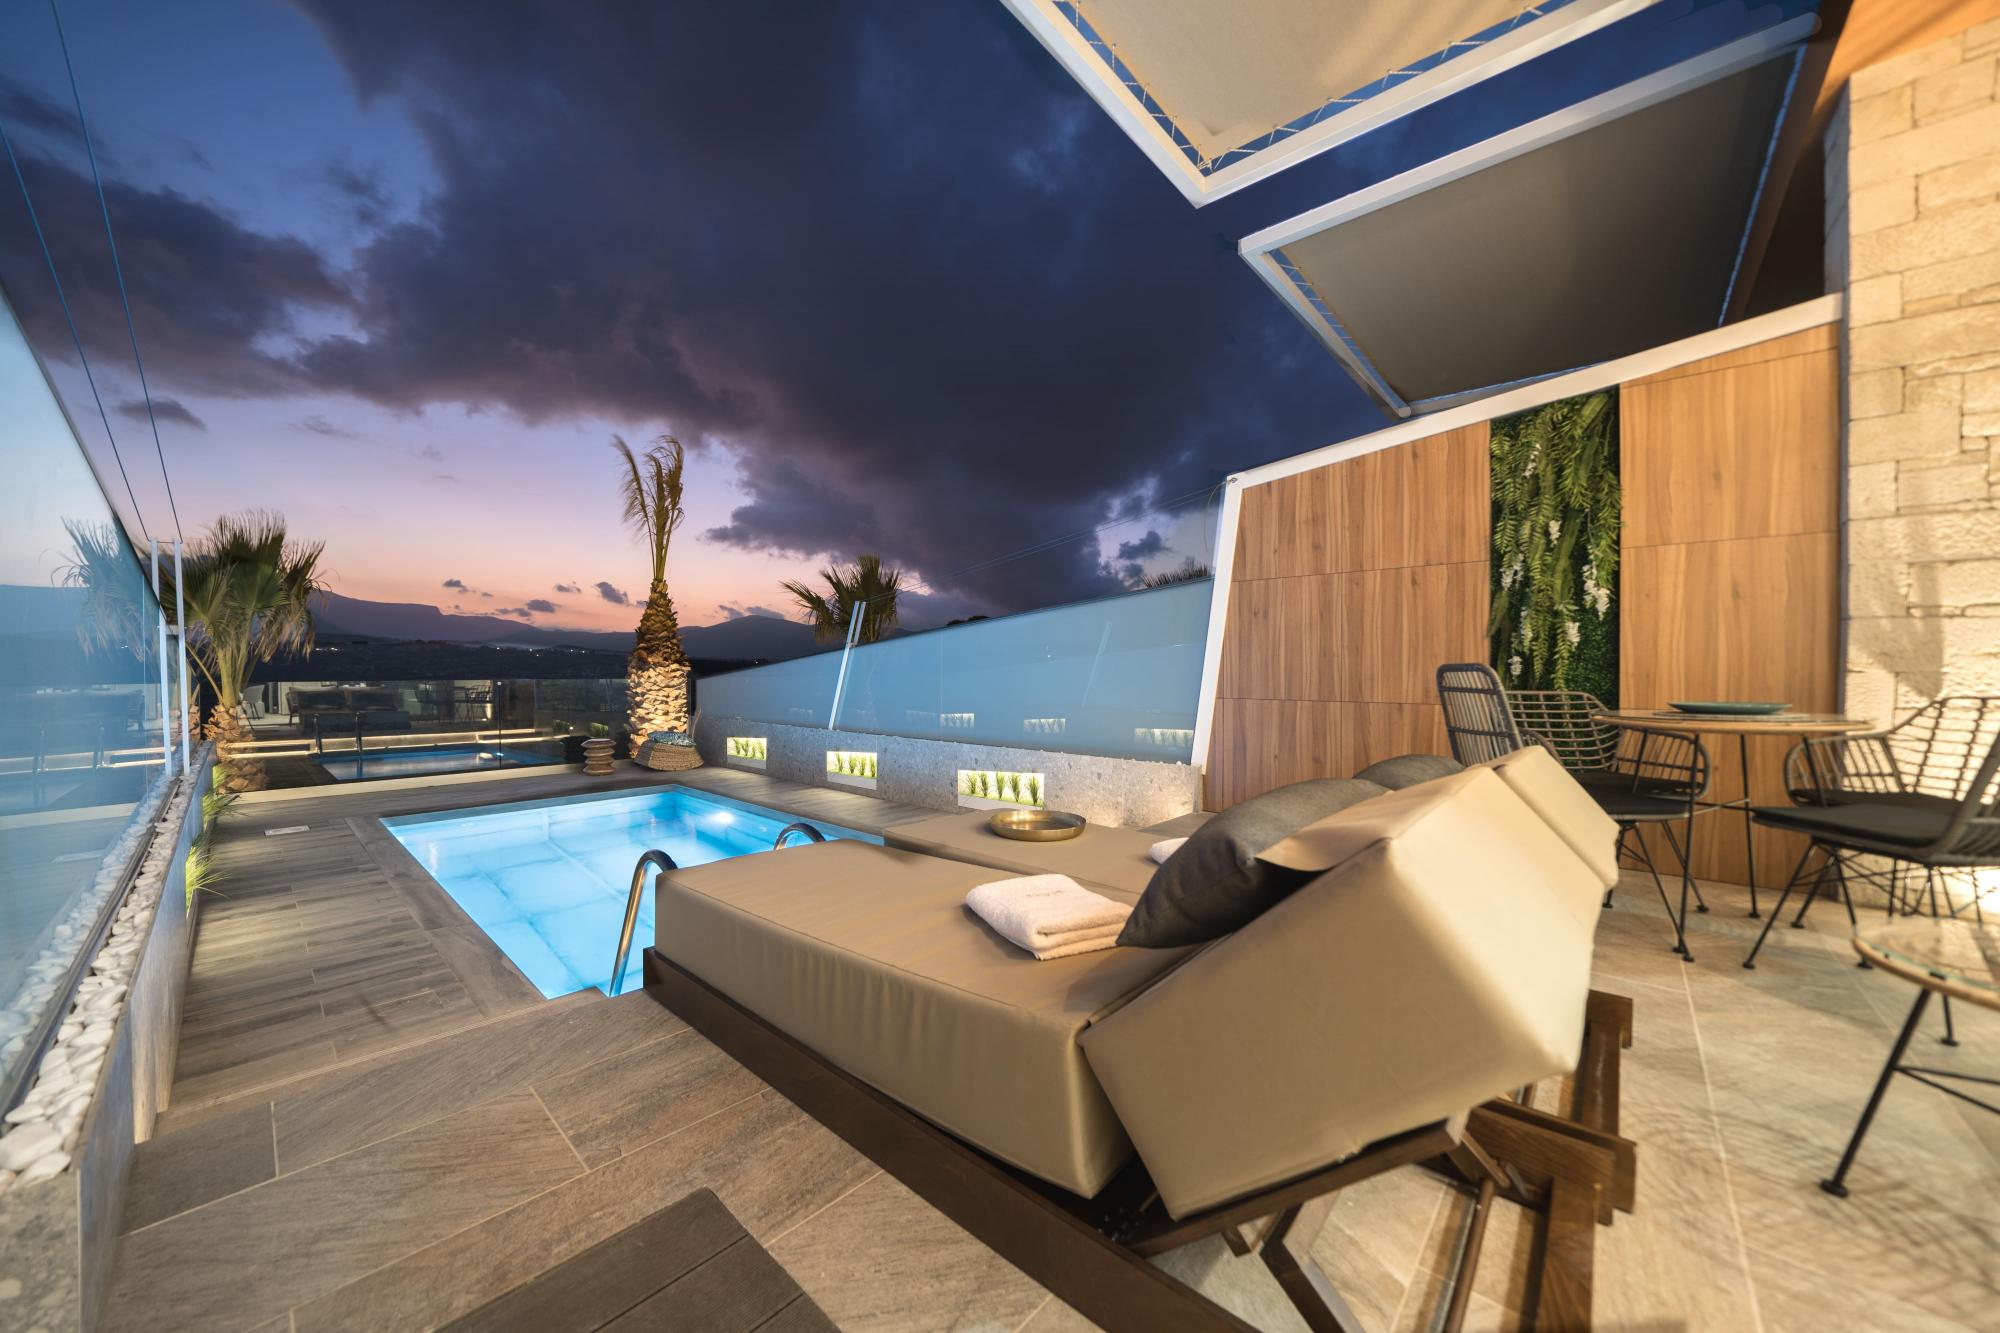 Property Image 2 - Oleas Suite Earth   Private Pool